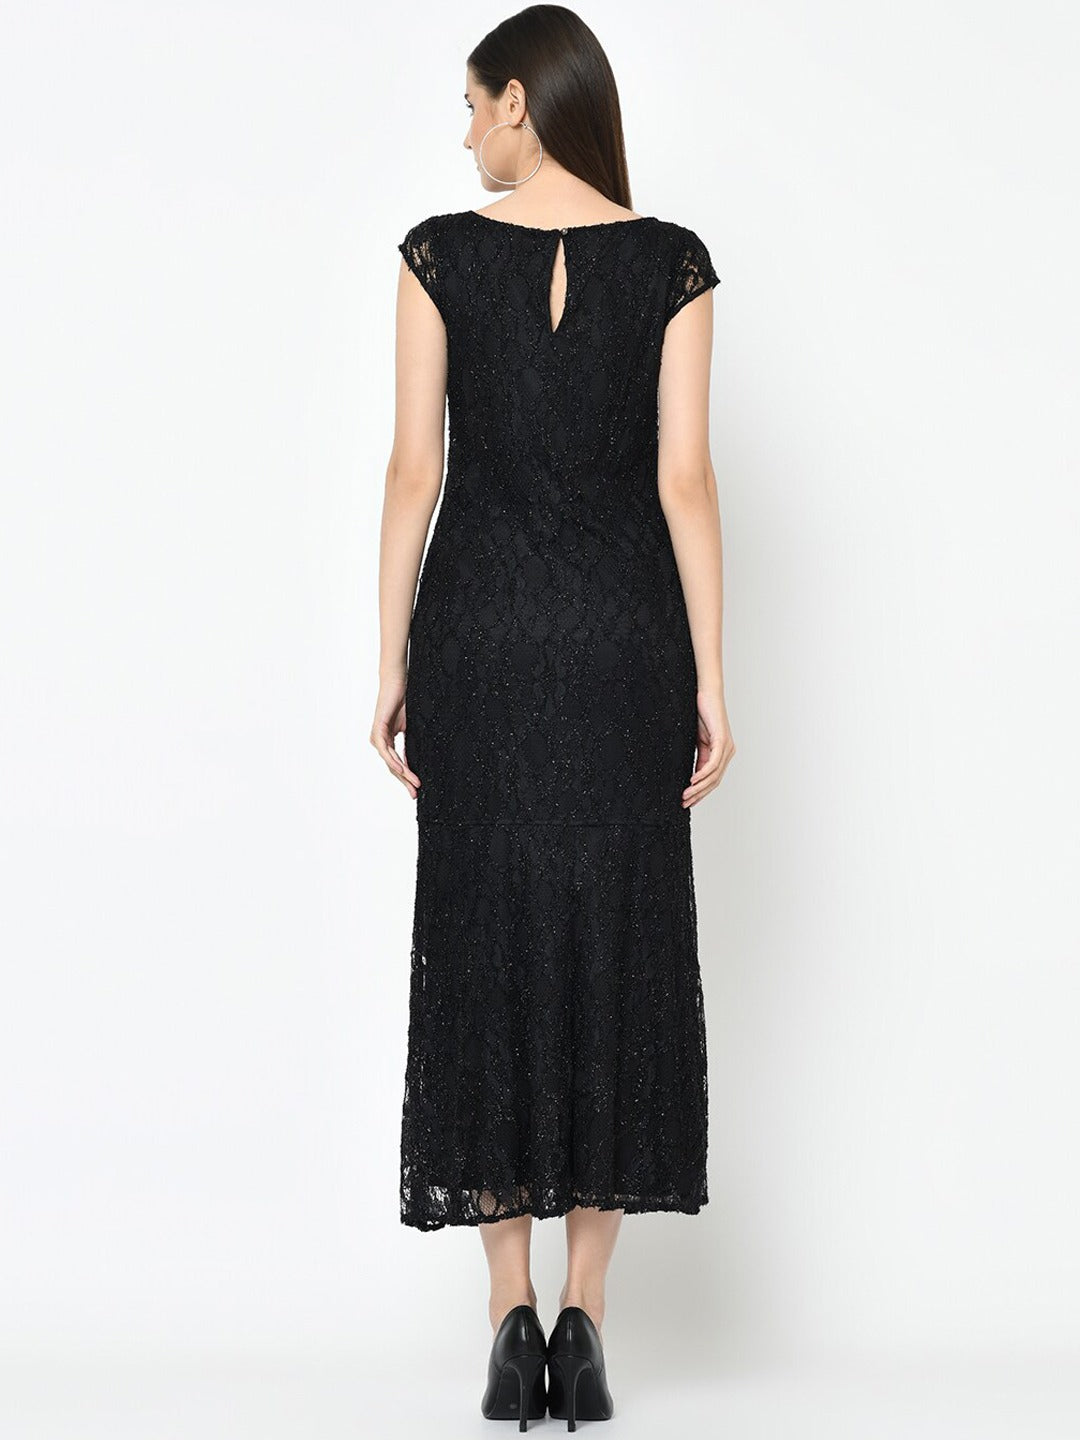 Black ShortSleeves Round Neck Solid Maxi Dress For Party Wear